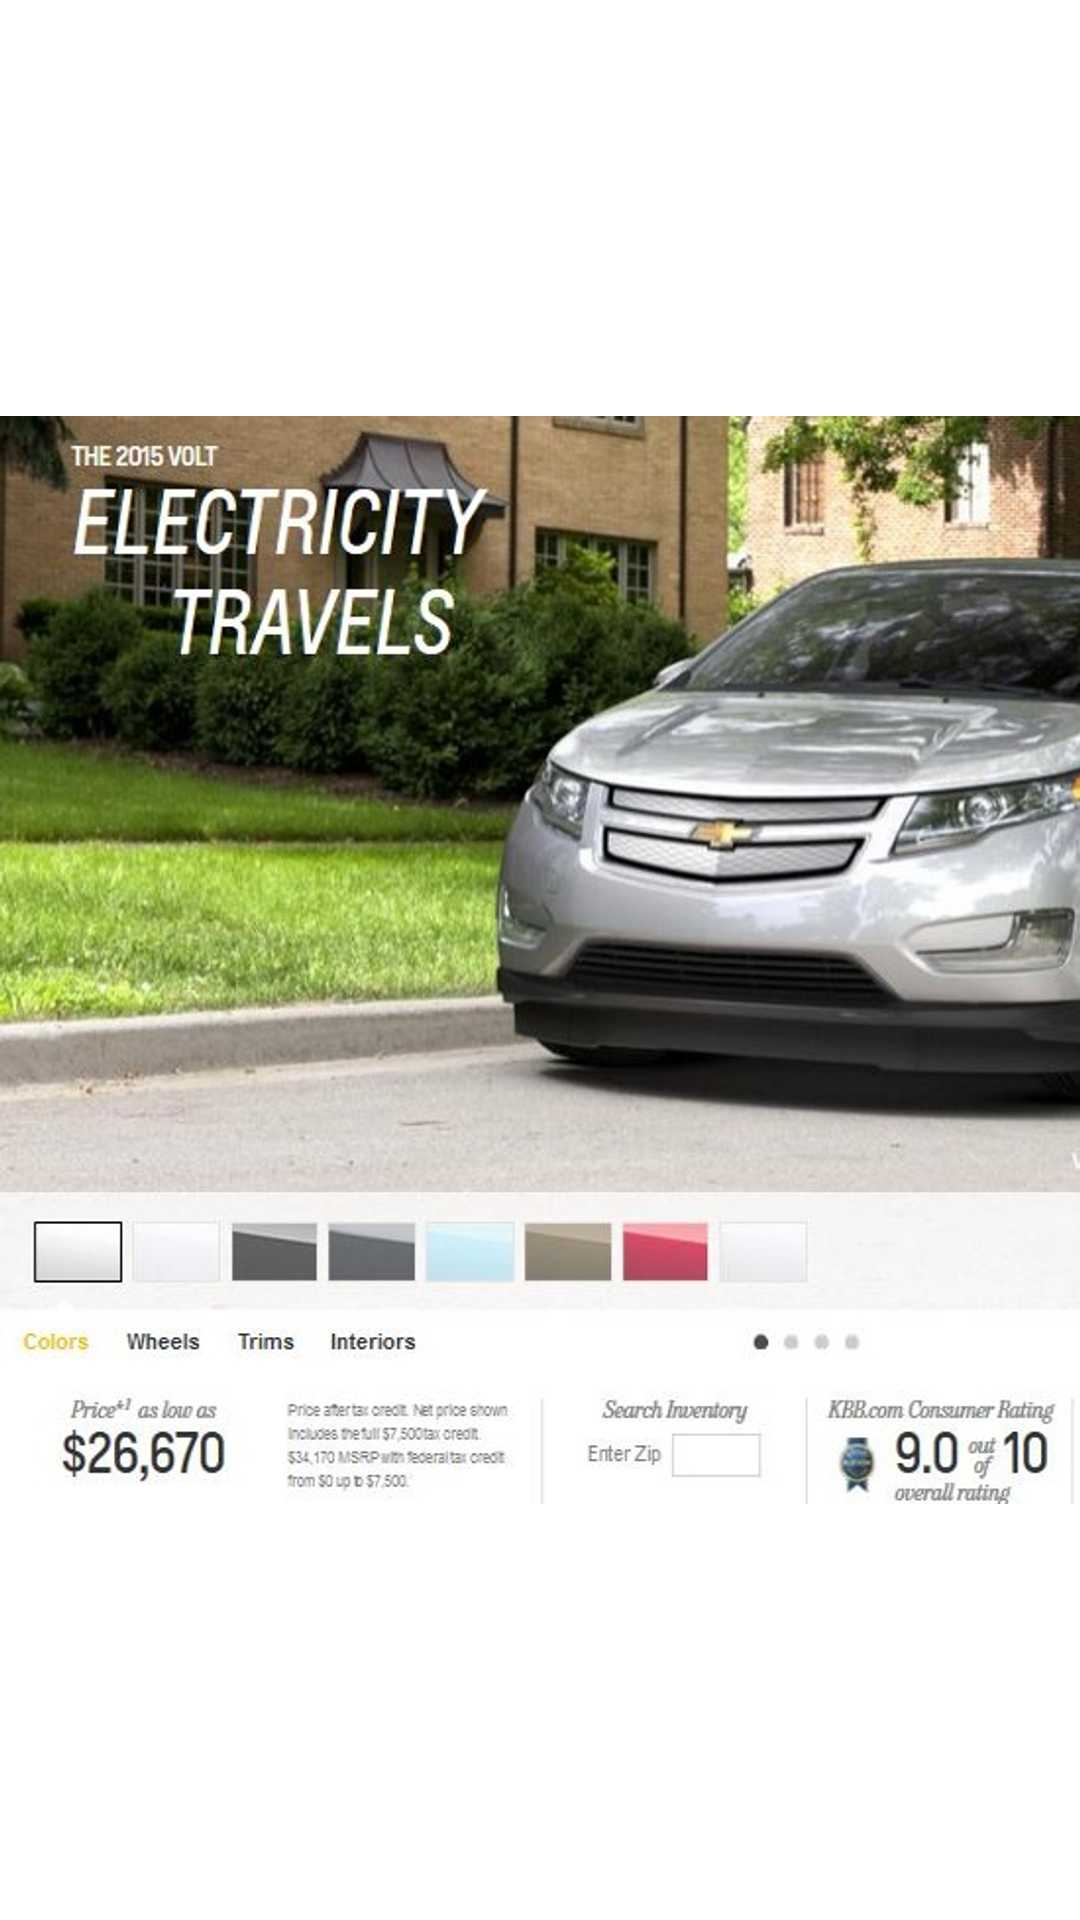 how-to-get-the-queensland-government-electric-vehicle-rebate-in-cairns